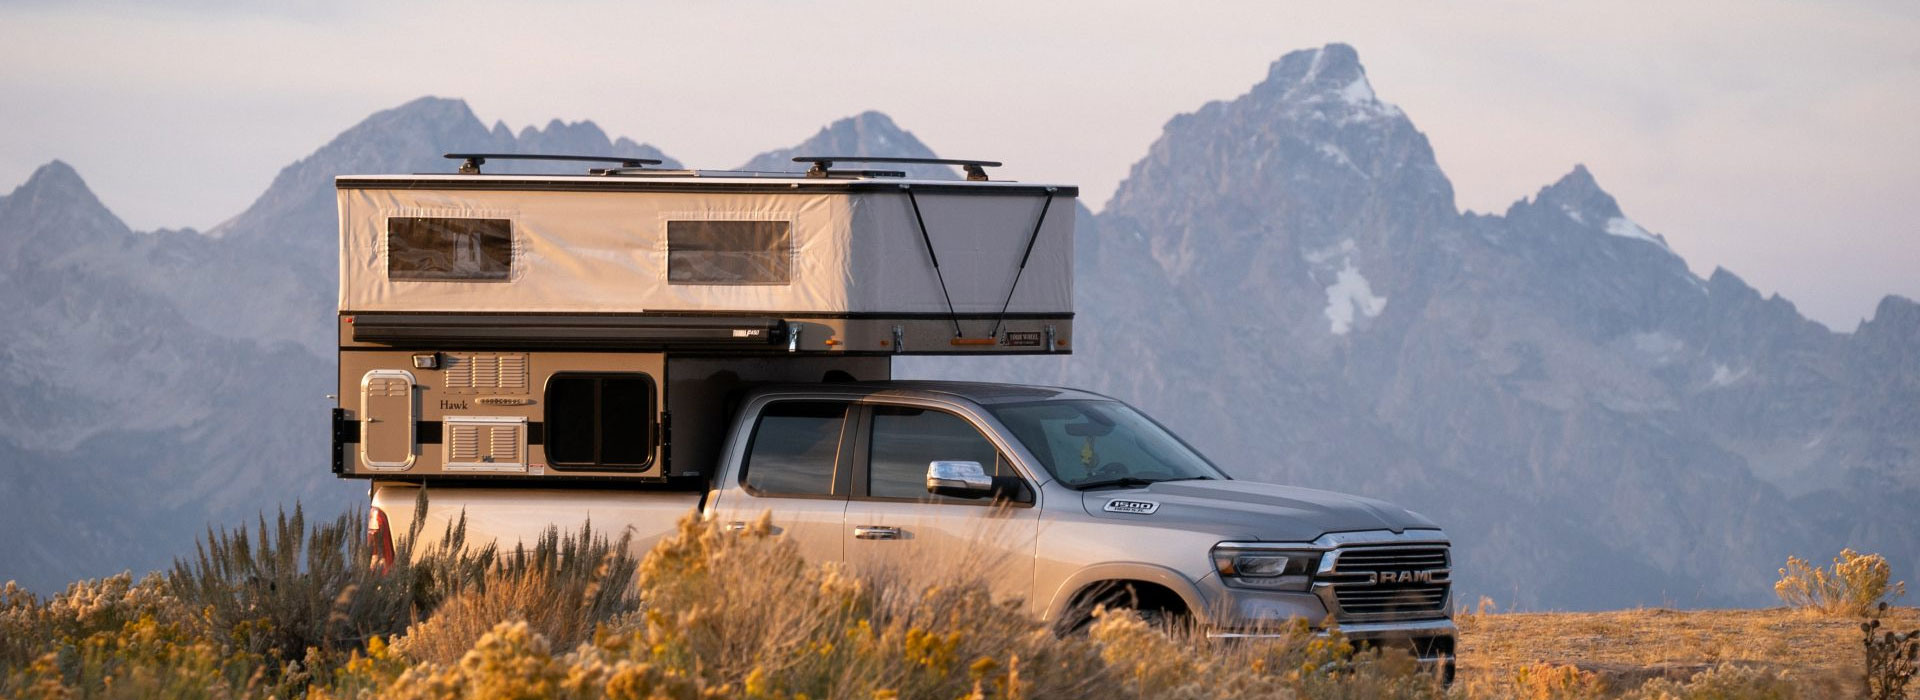 four wheel campers